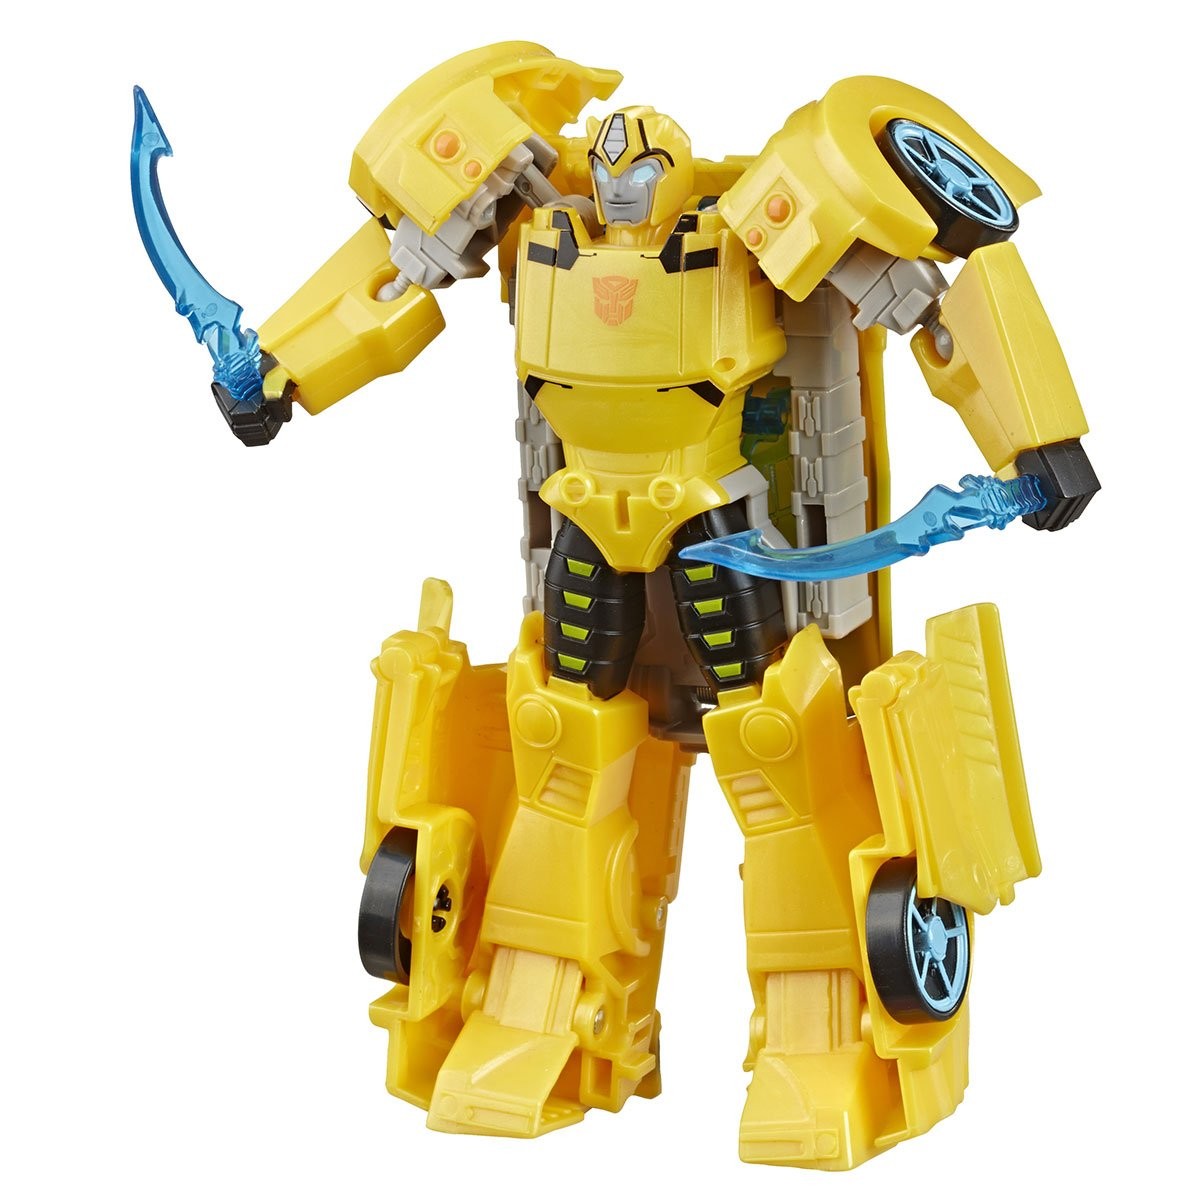 TRANSFORMERS BUMBLEBEE LUMINEUX SONORE 50 CM x 20CM